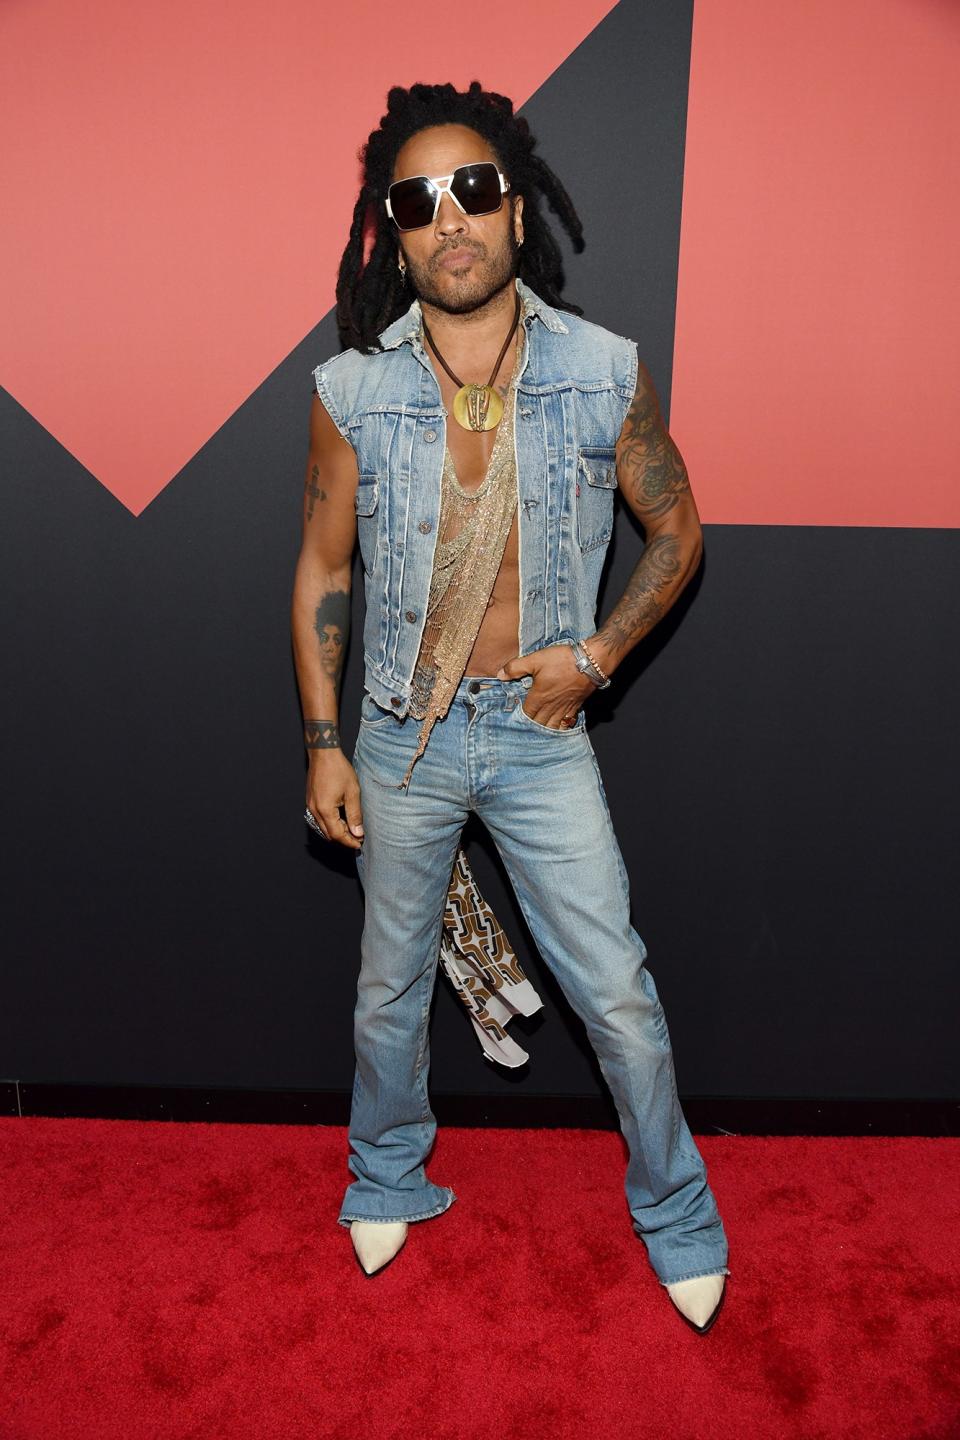 The Must See Looks from the 2019 VMAs